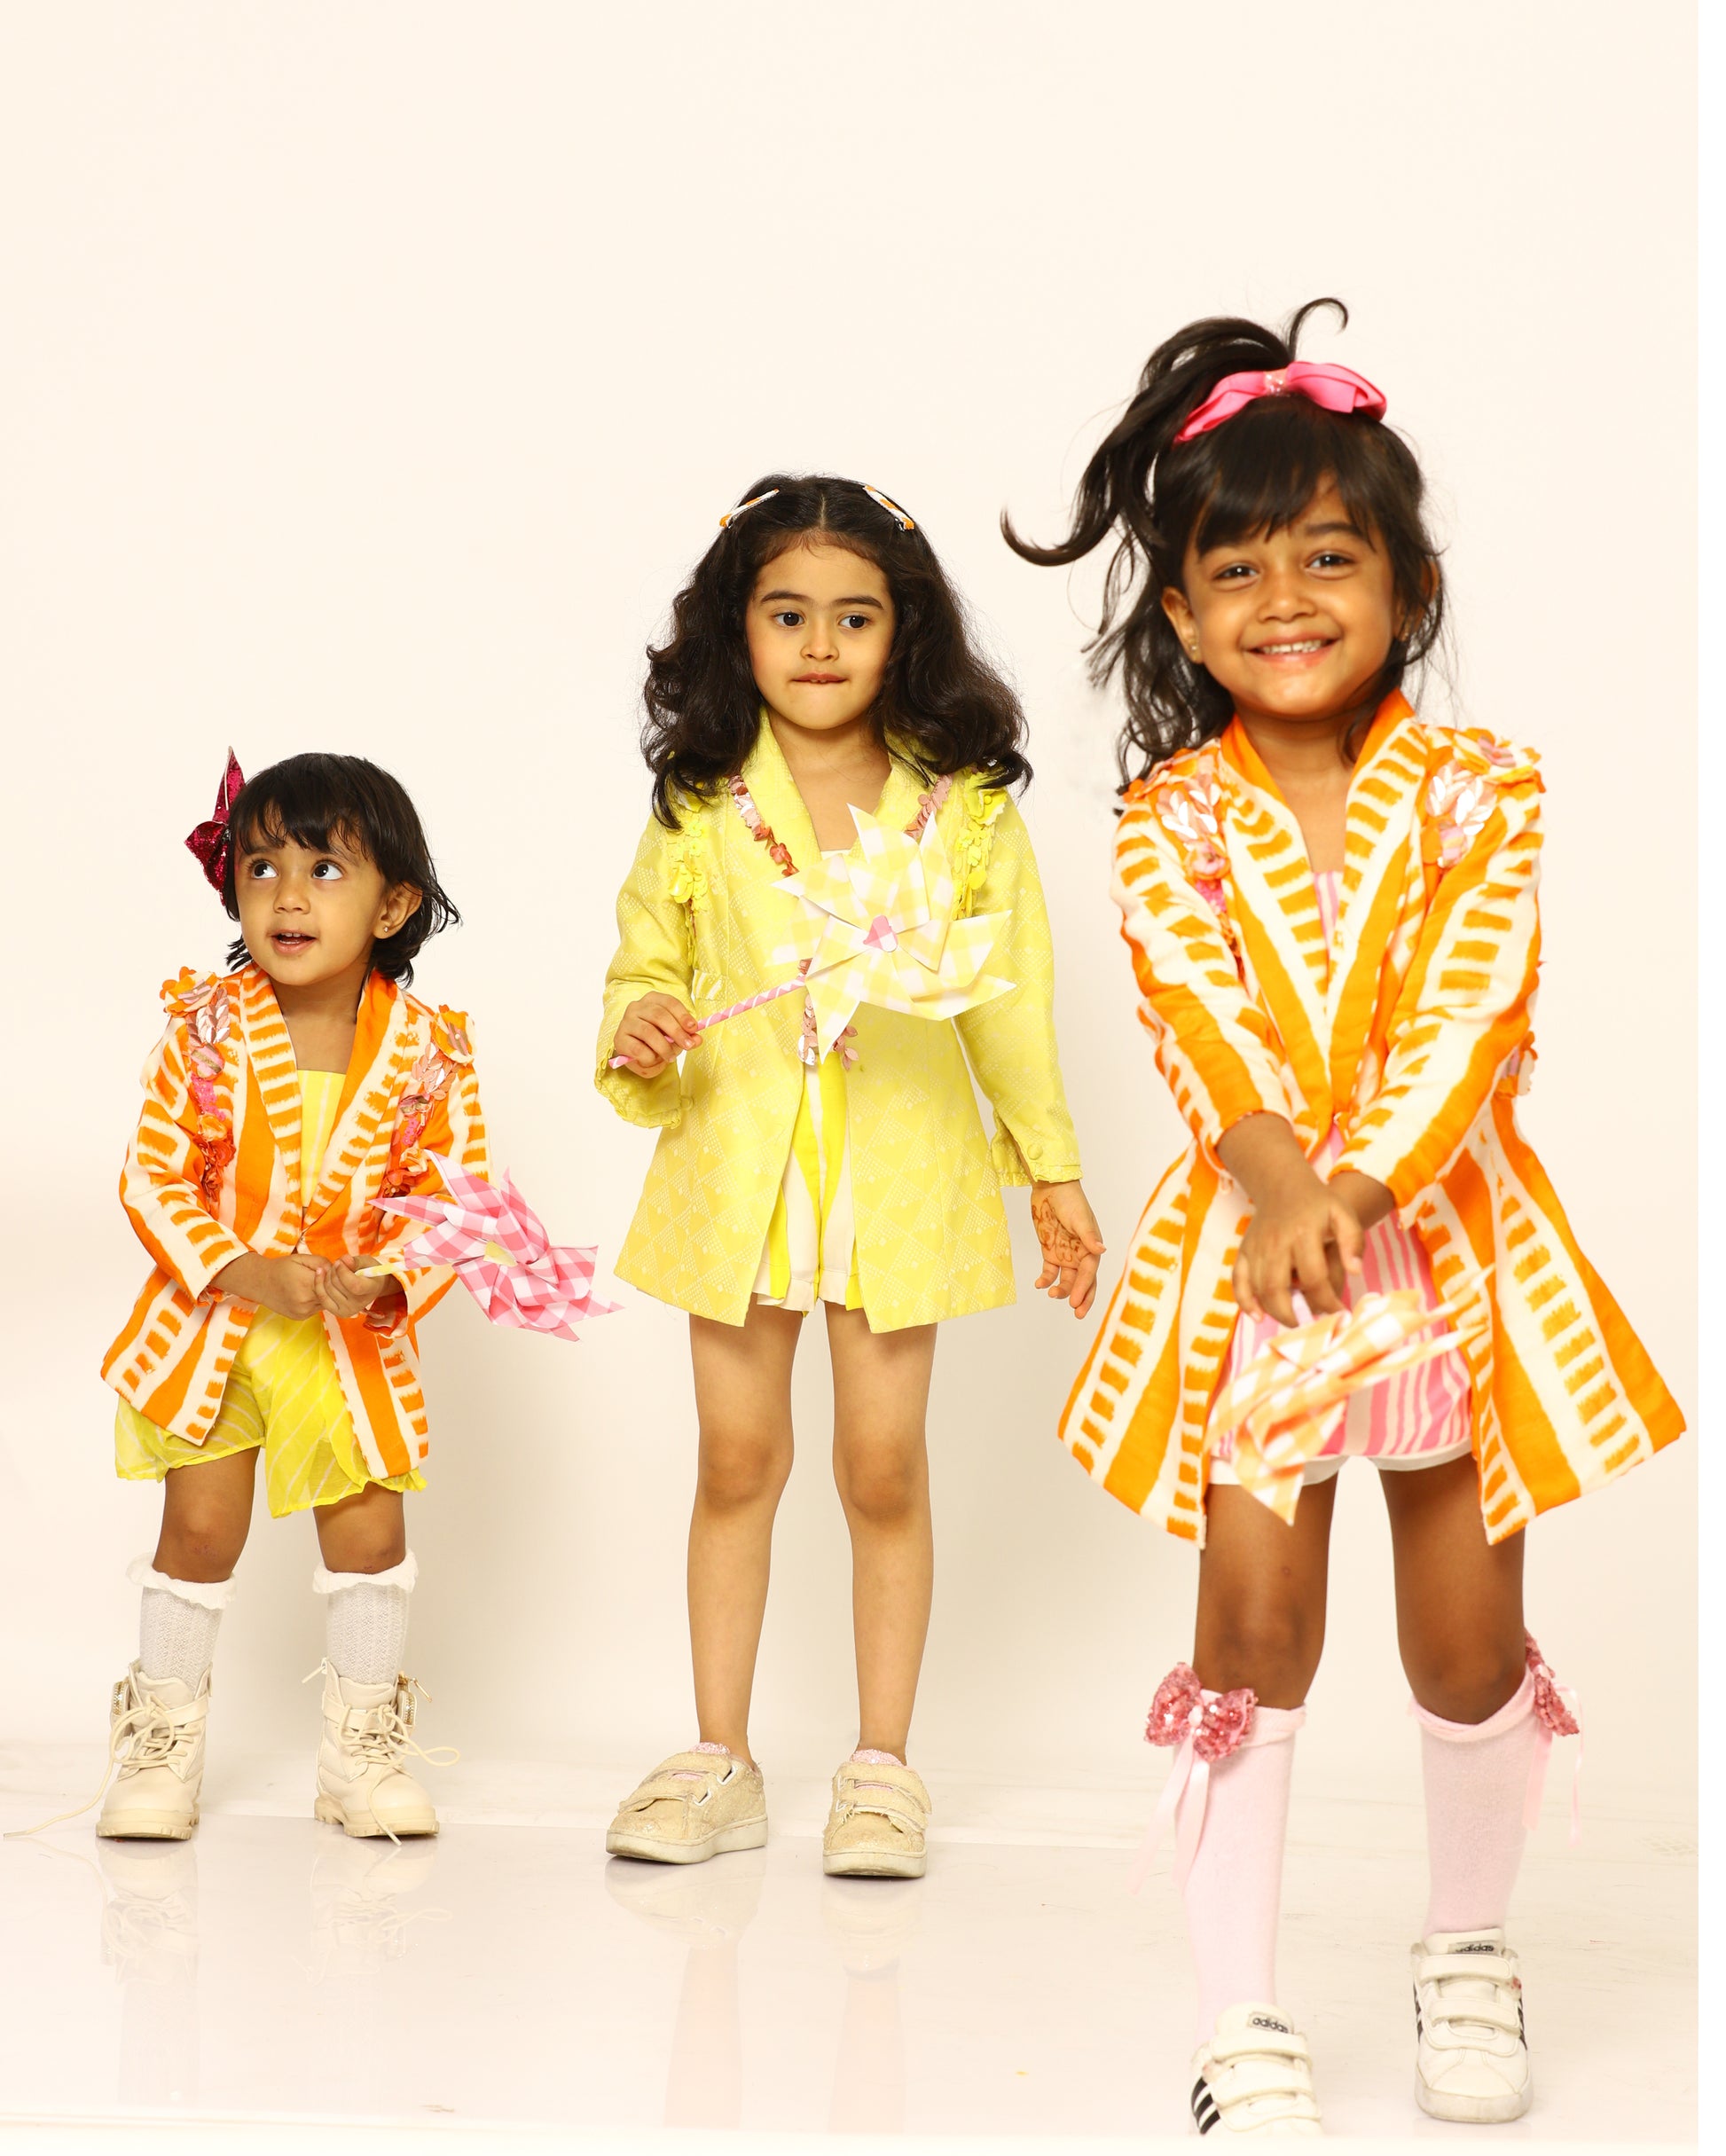 orange + candy + blazer + striped + flowers + yellow + striped + co - ord + bow + socks + shoe + party + cheerful + jump + friends + collab + fun + trio + front